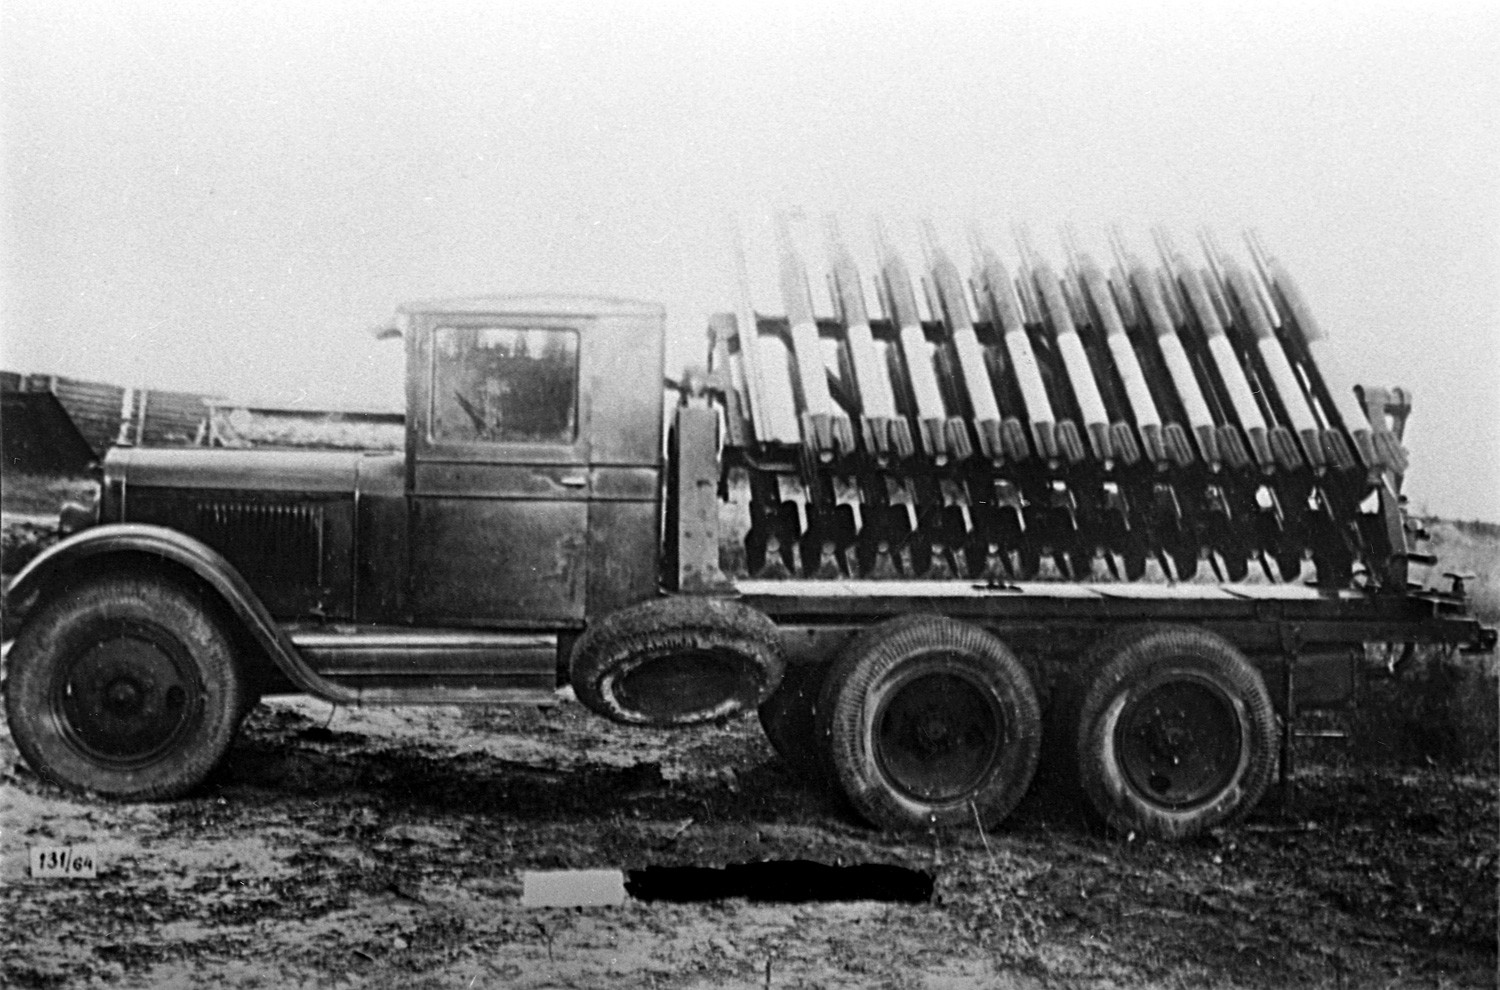 Unlike the traditional artillery, BM-13s were mobile and could move quickly between firing spots